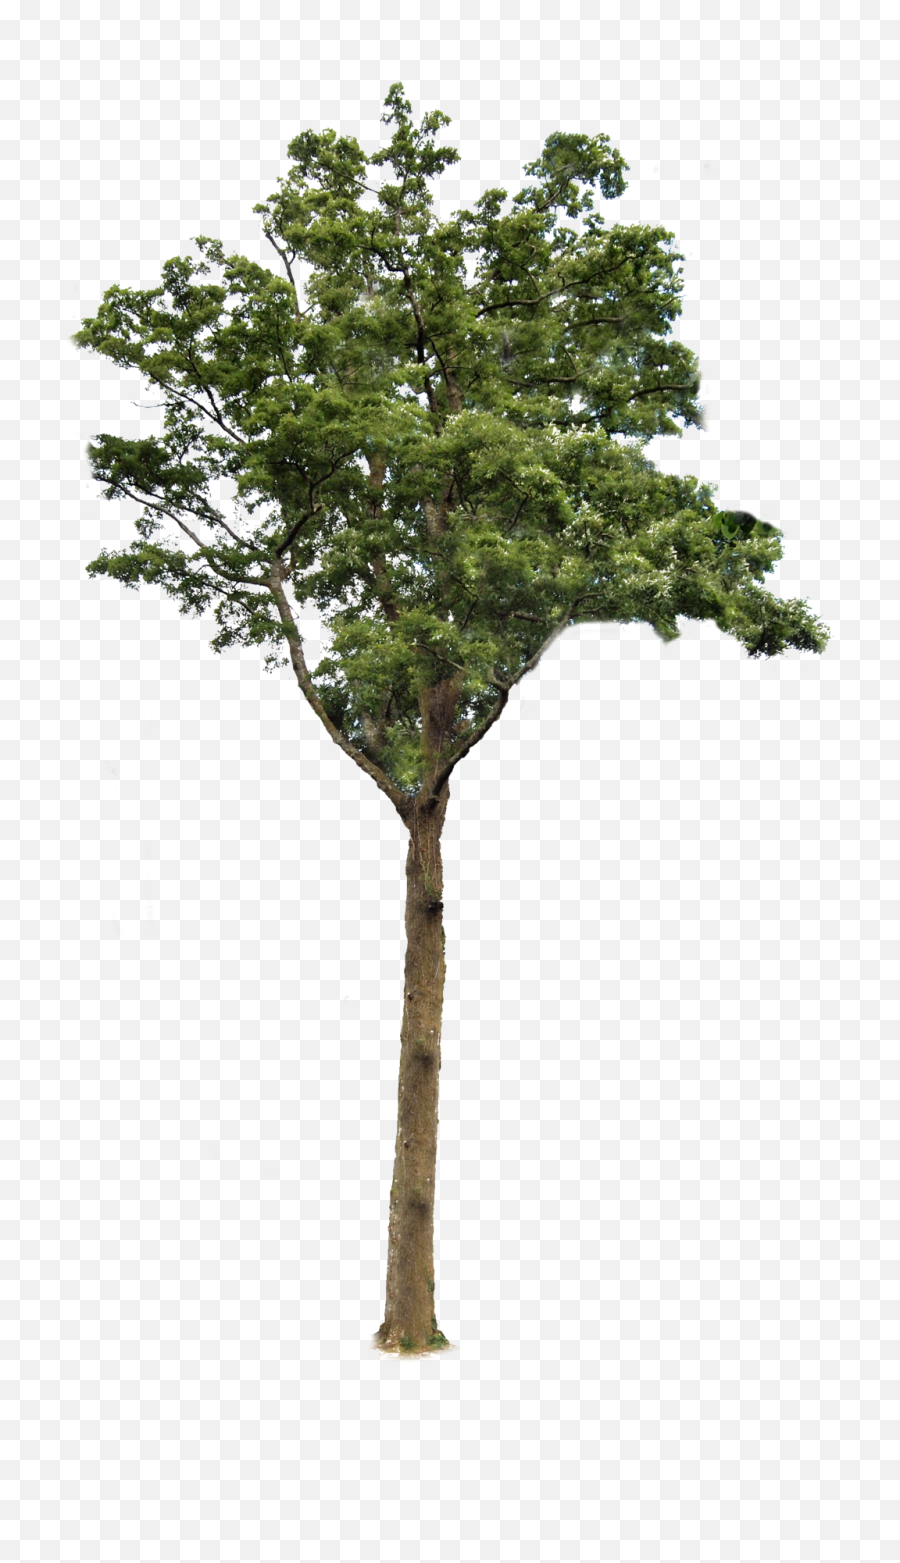 Tree With Transparent Background - 6390 Transparentpng Transparent Background Tree Png,Pine Tree Transparent Background